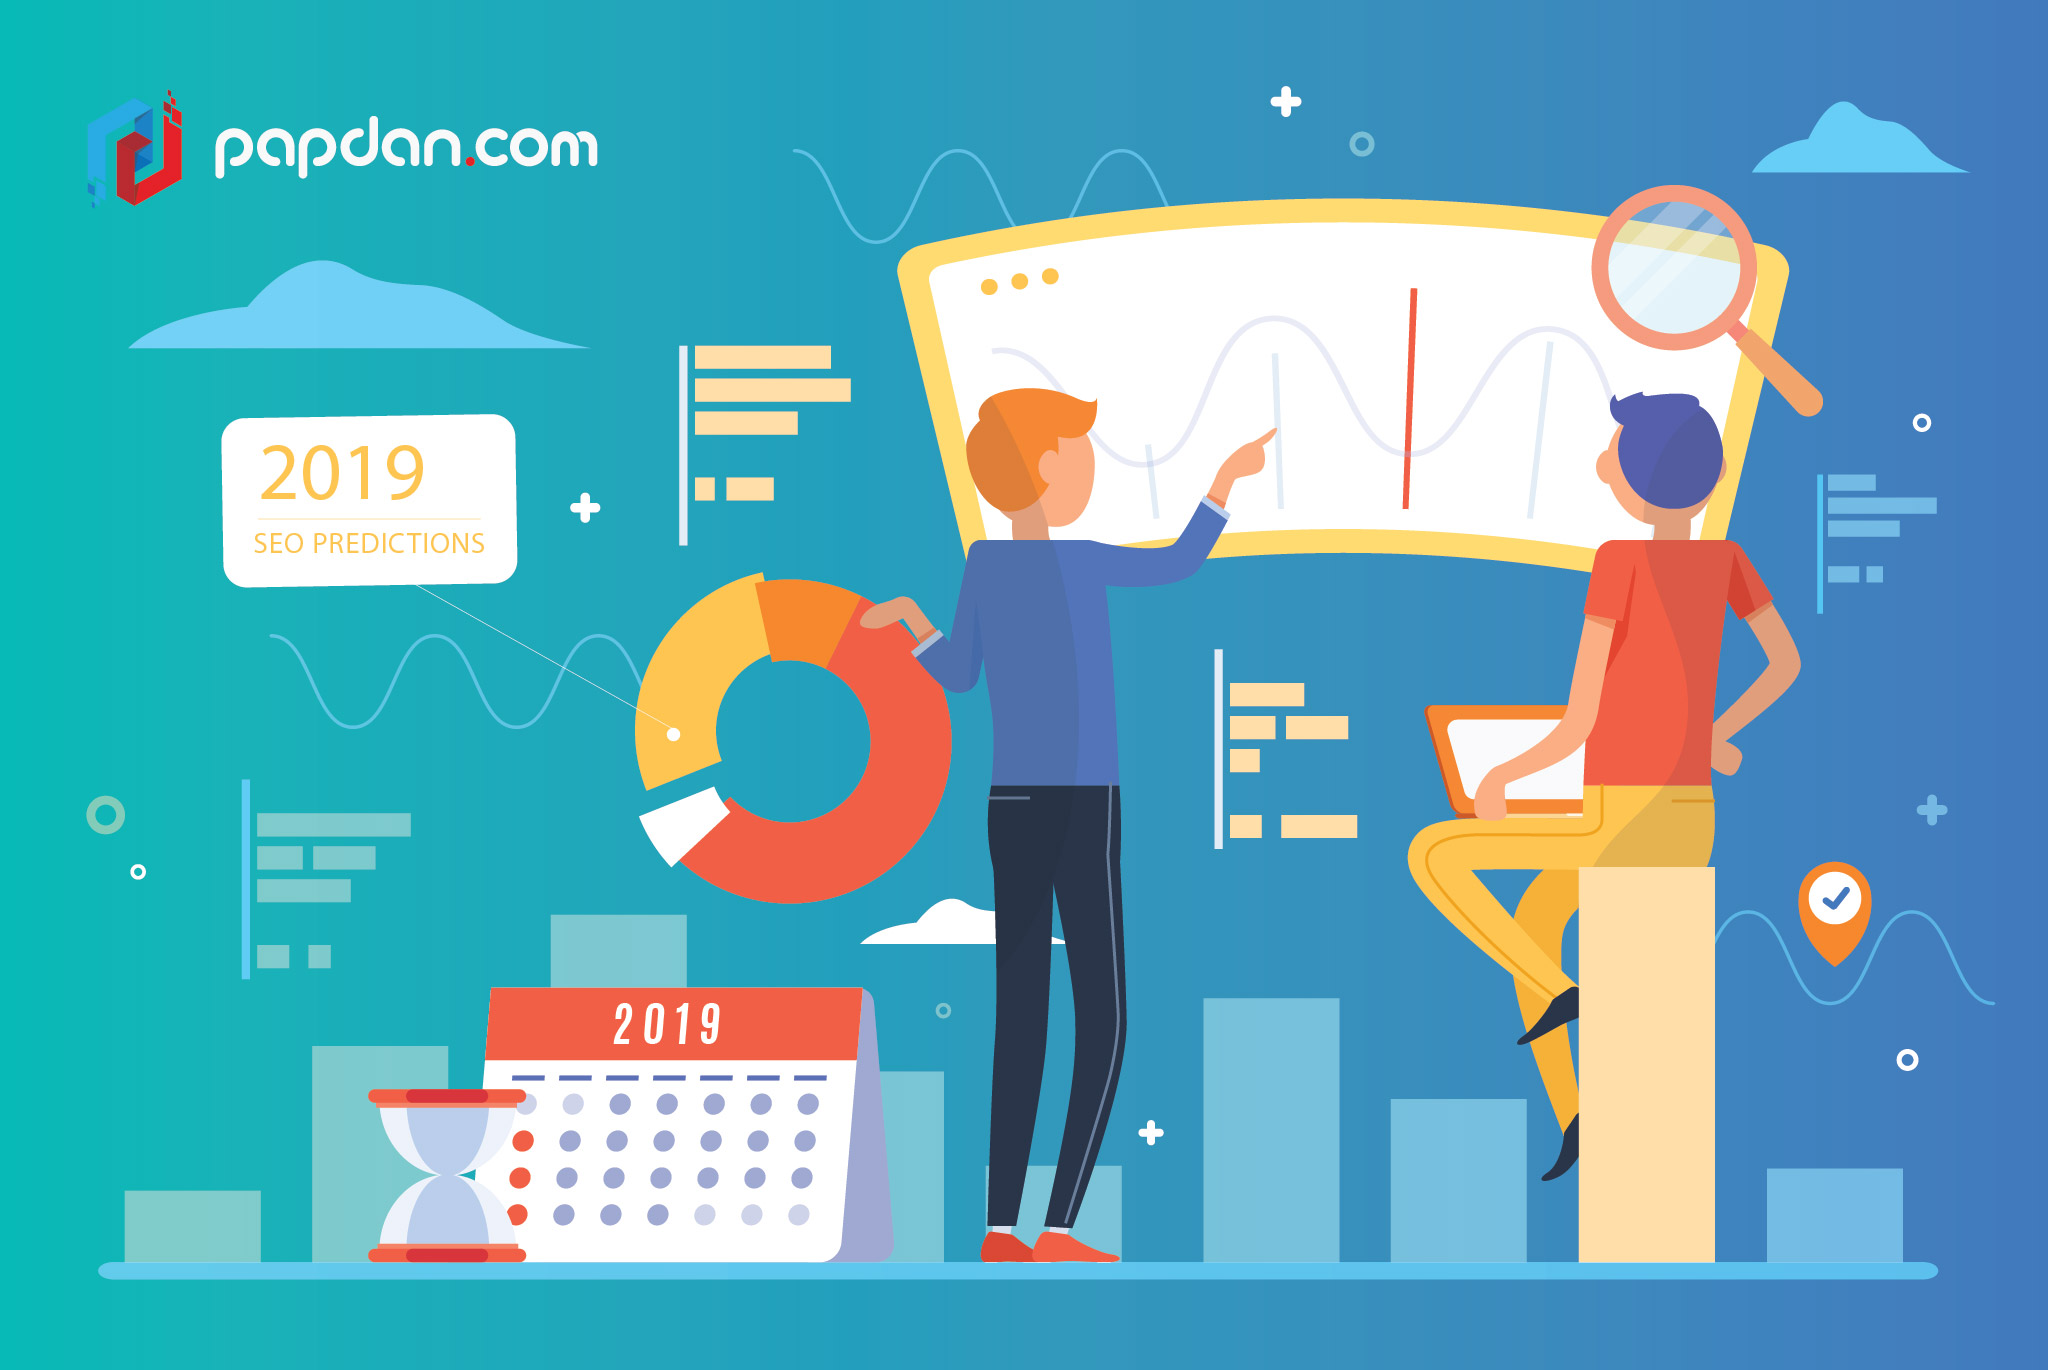 What Will Happen in 2019? These SEO Predictions for 2019 Will Get You Prepared for Your Business’ Future